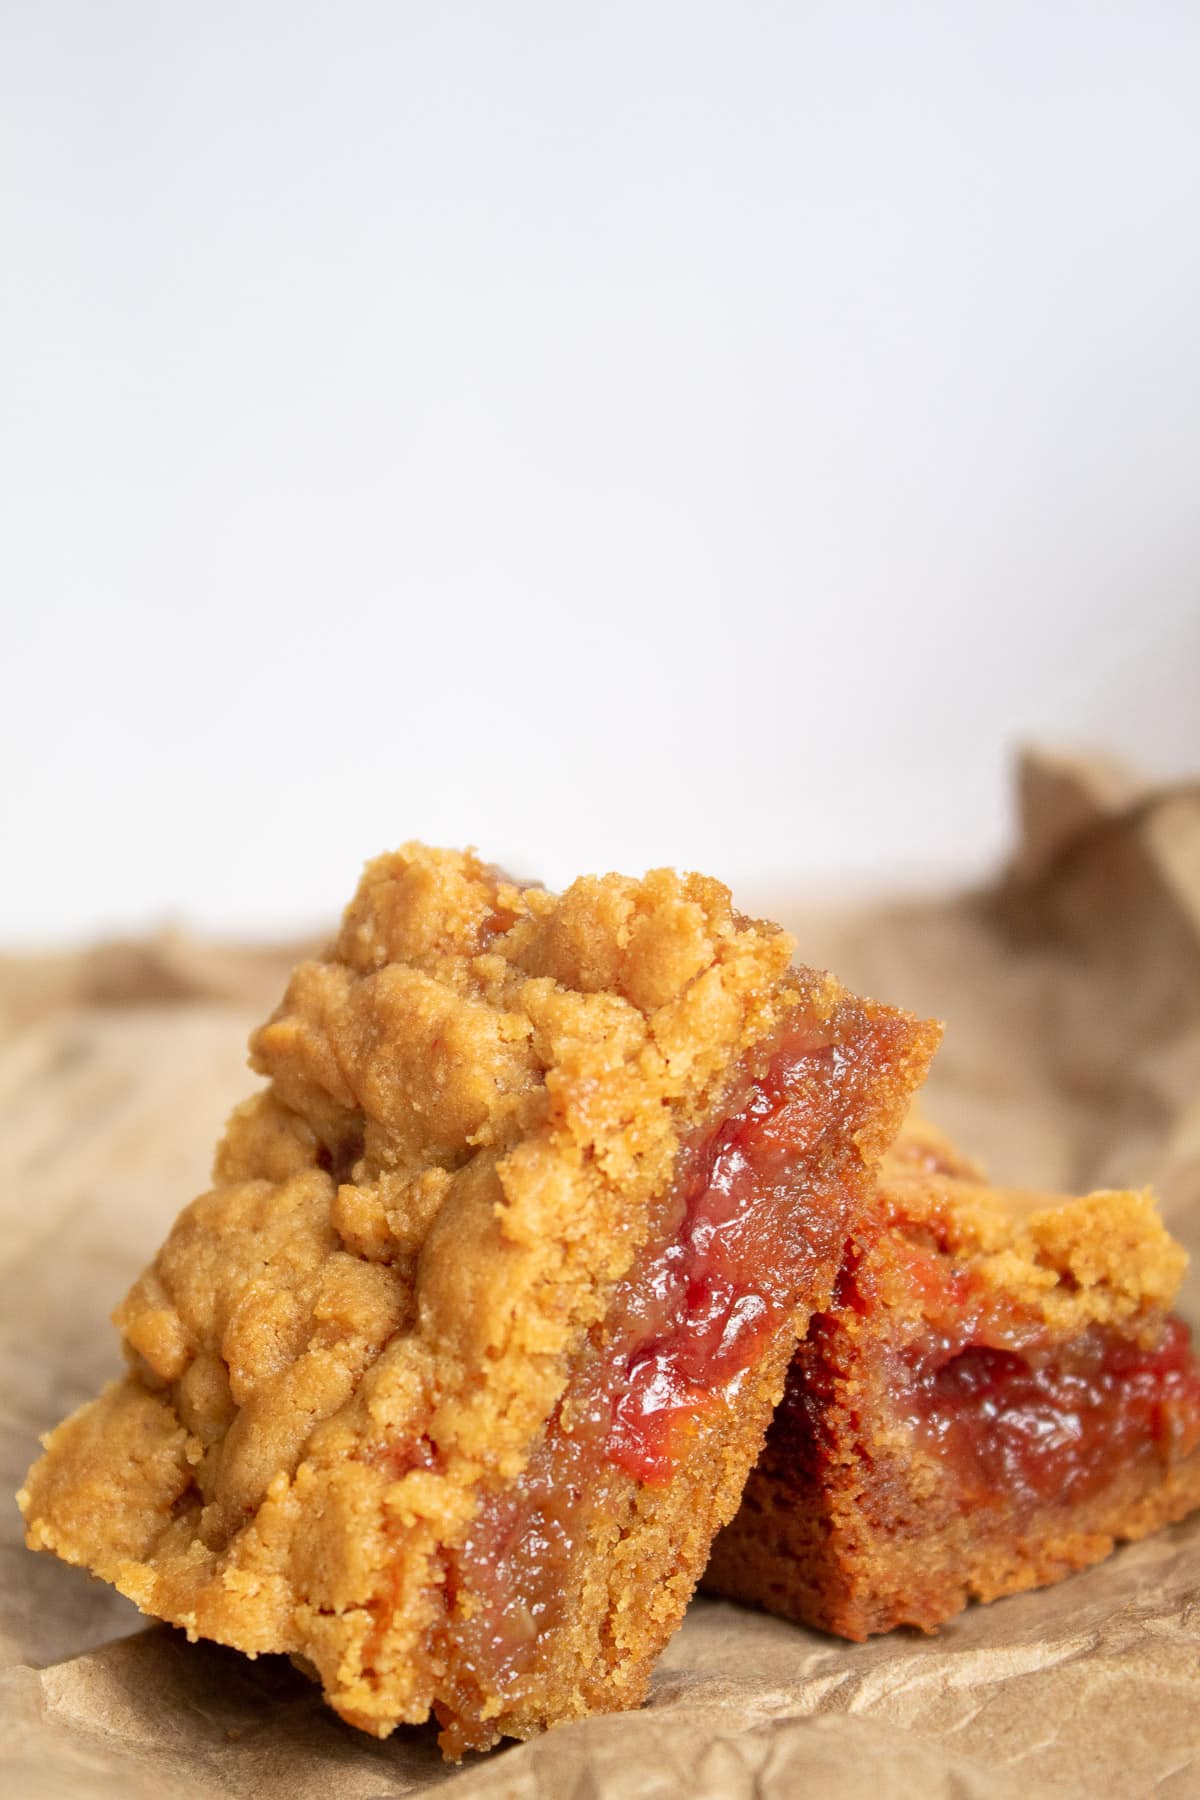 A detail image of the bars, highlighting the red jam layer and the soft peanut butter cookie layers.